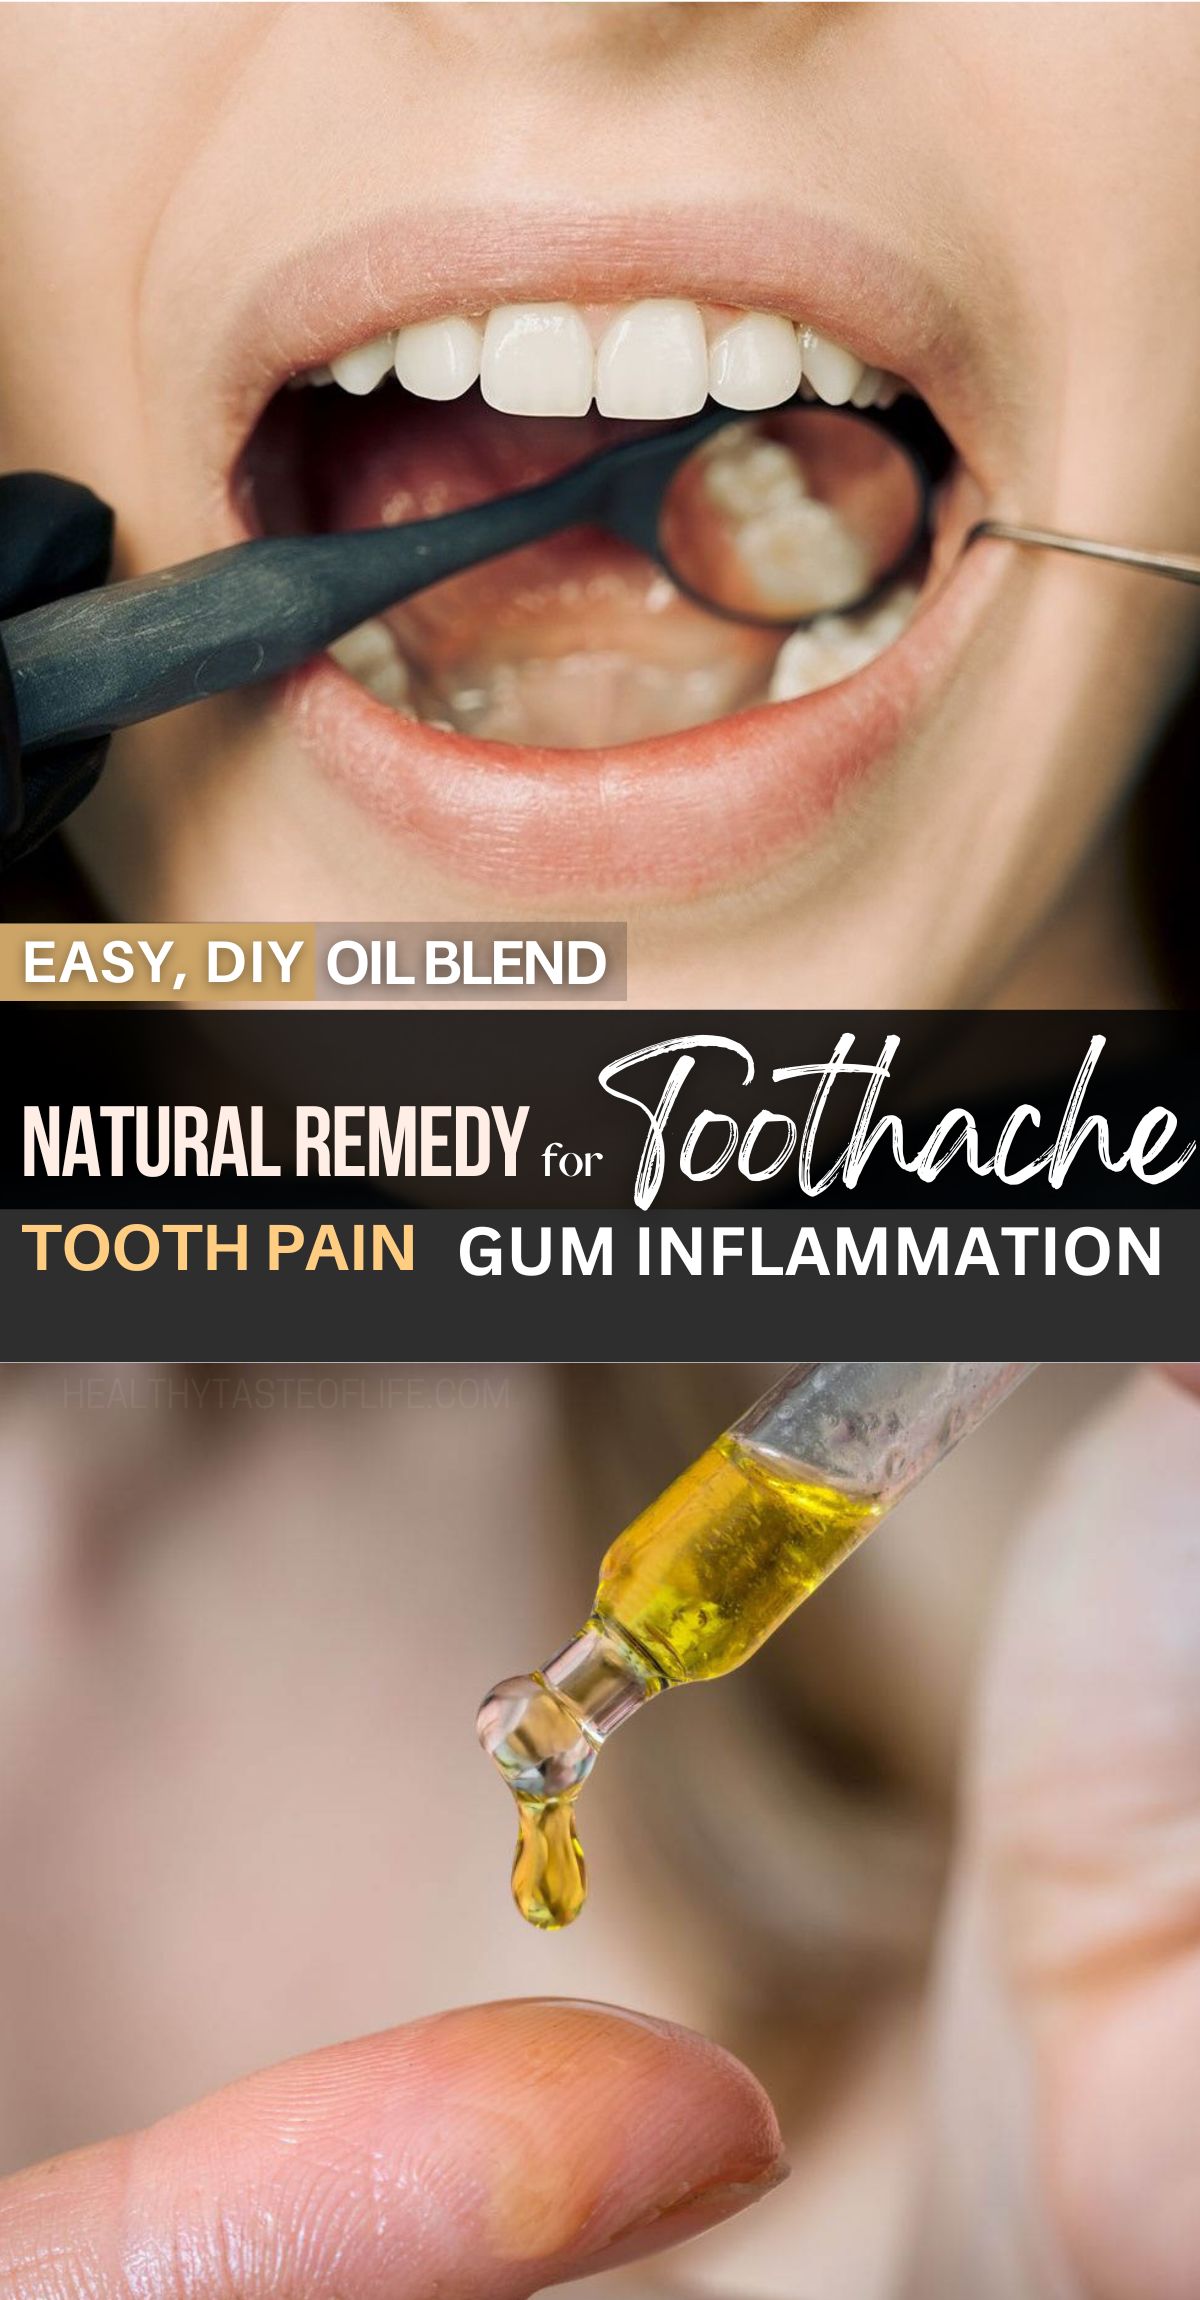 This blend of oils for toothache is a great all-natural home remedy to relieve dental pain and gum inflammation. This DIY oil is great for stopping a toothache whether is dull or throbbing and bring pain relief in minutes. Oils for tooth pain, inflammation; natural home remedy for tooth pain relief, natural antibiotic for toothache and infection. #toothache #painrelief #naturalremedy #toothpain #naturalremedy